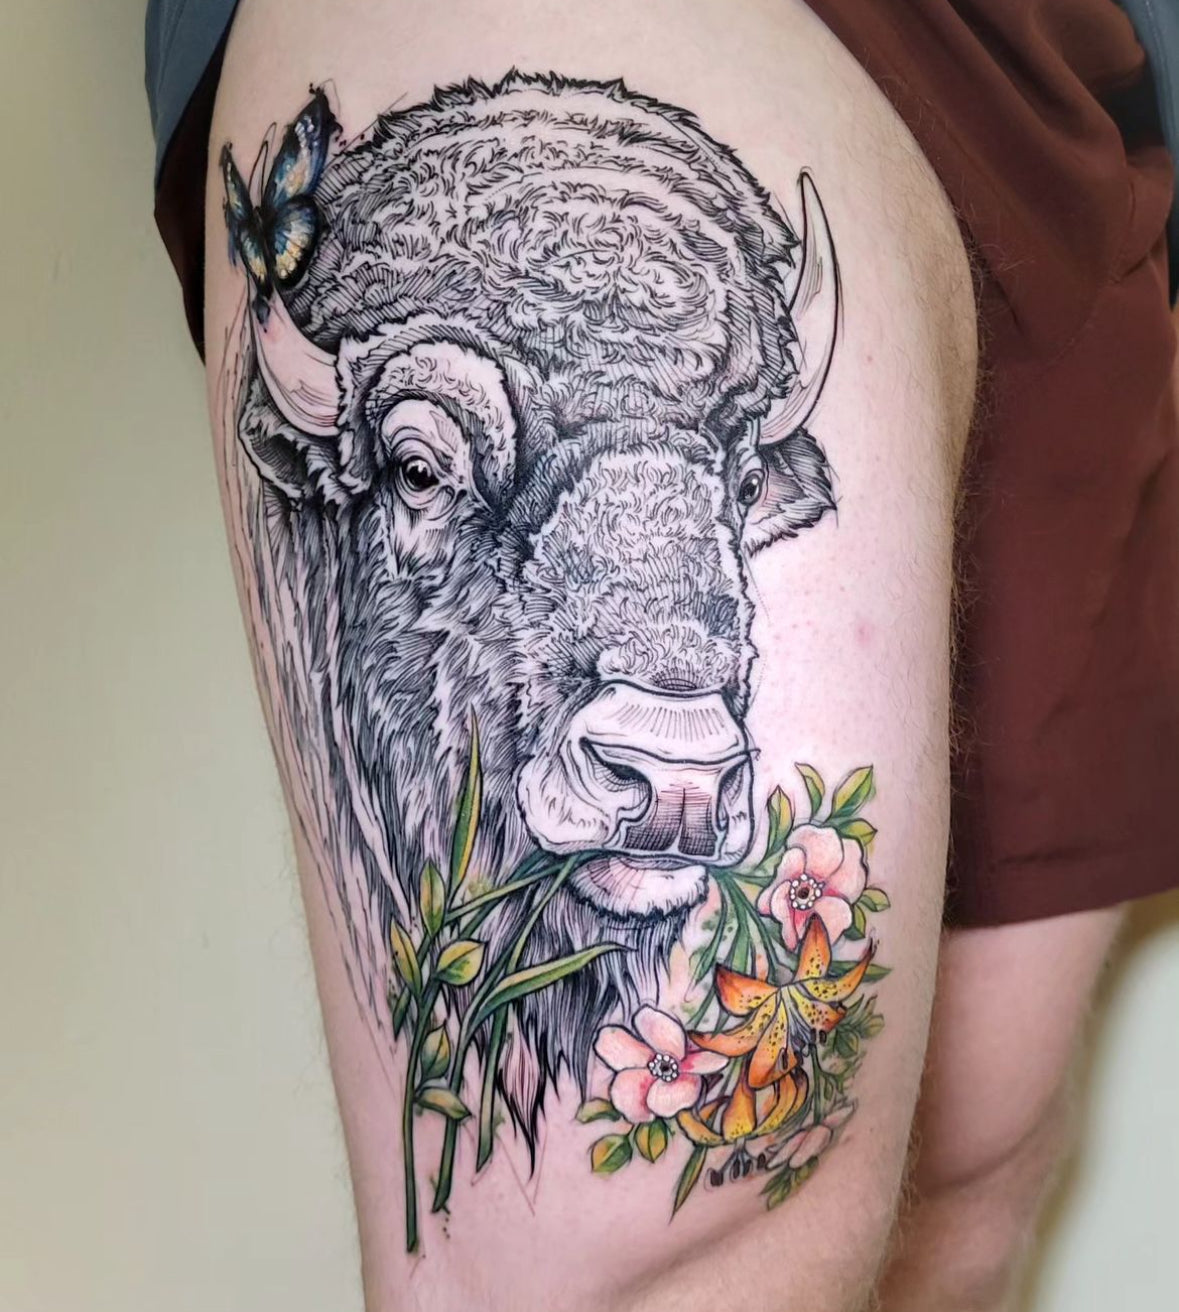 My first tattoo, made by Christoffer at built to last in Kristianstad  Sweden : r/tattoos